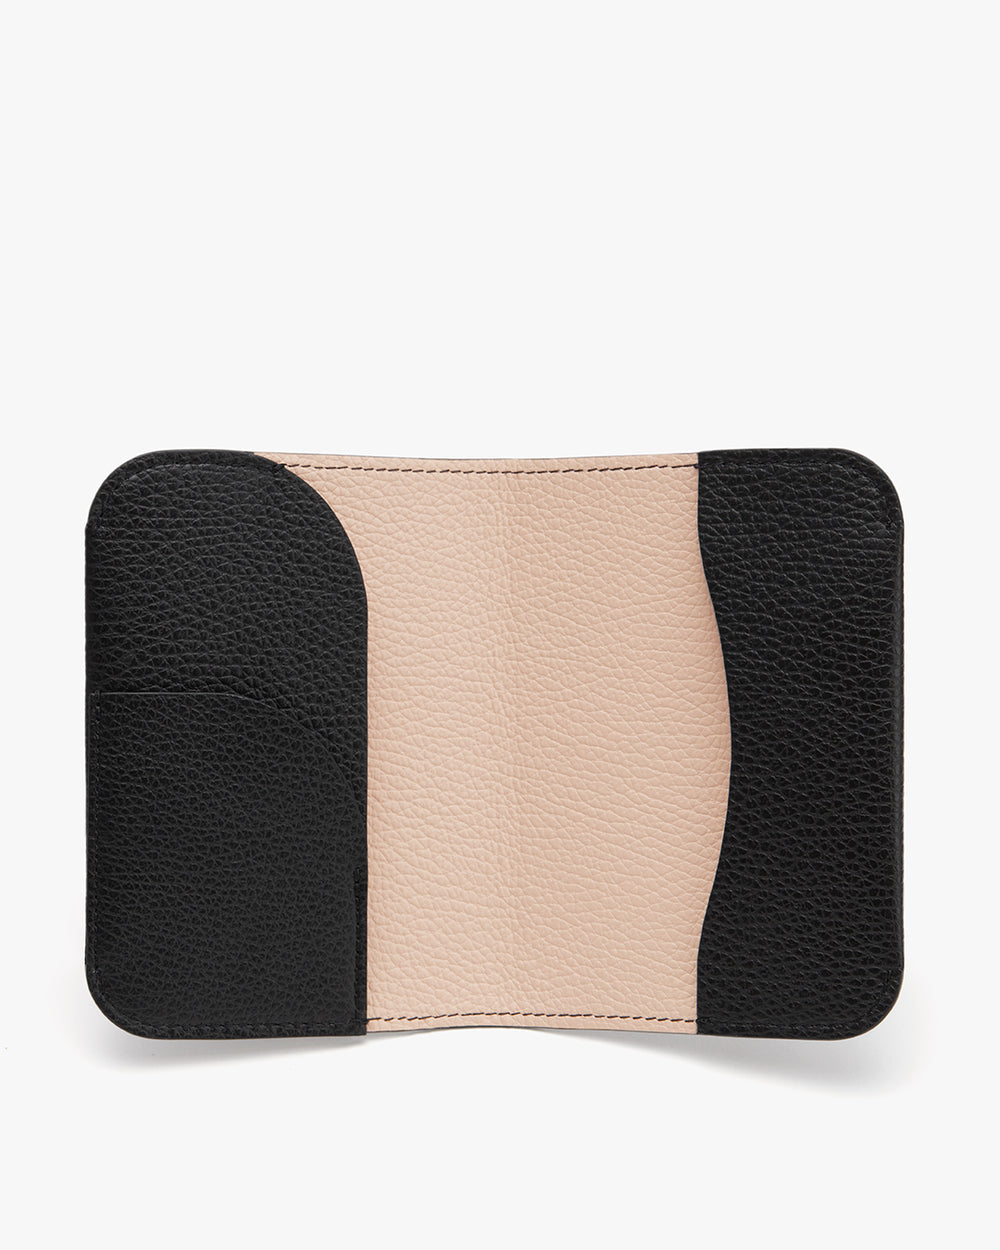 Open wallet with two card slots on each side.